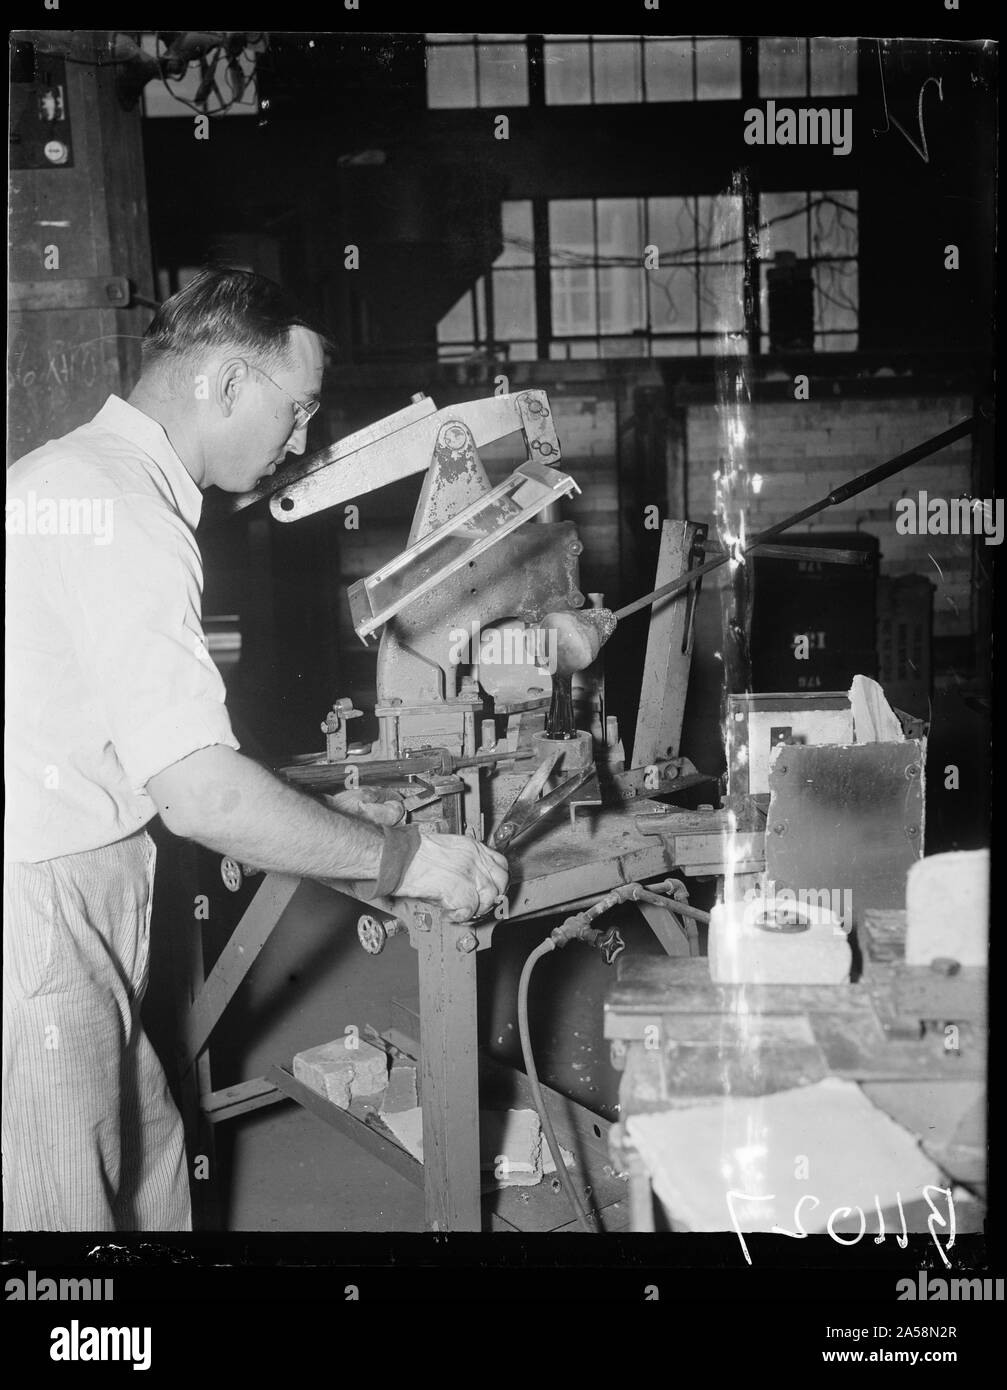 Uncle Sam makes own glass. Washington, D.C. Aug. 24. All optical glass used by the United States Navy is manufactured and finished by the Bureau of Standards in Washington. L. Maxwell, of the Glass Section, Bureau of Standards, is shown cutting molten glass into the mold. He uses ordinary tailor's shears in cutting the hot substance which is about as soft as hot molasses candy Stock Photo